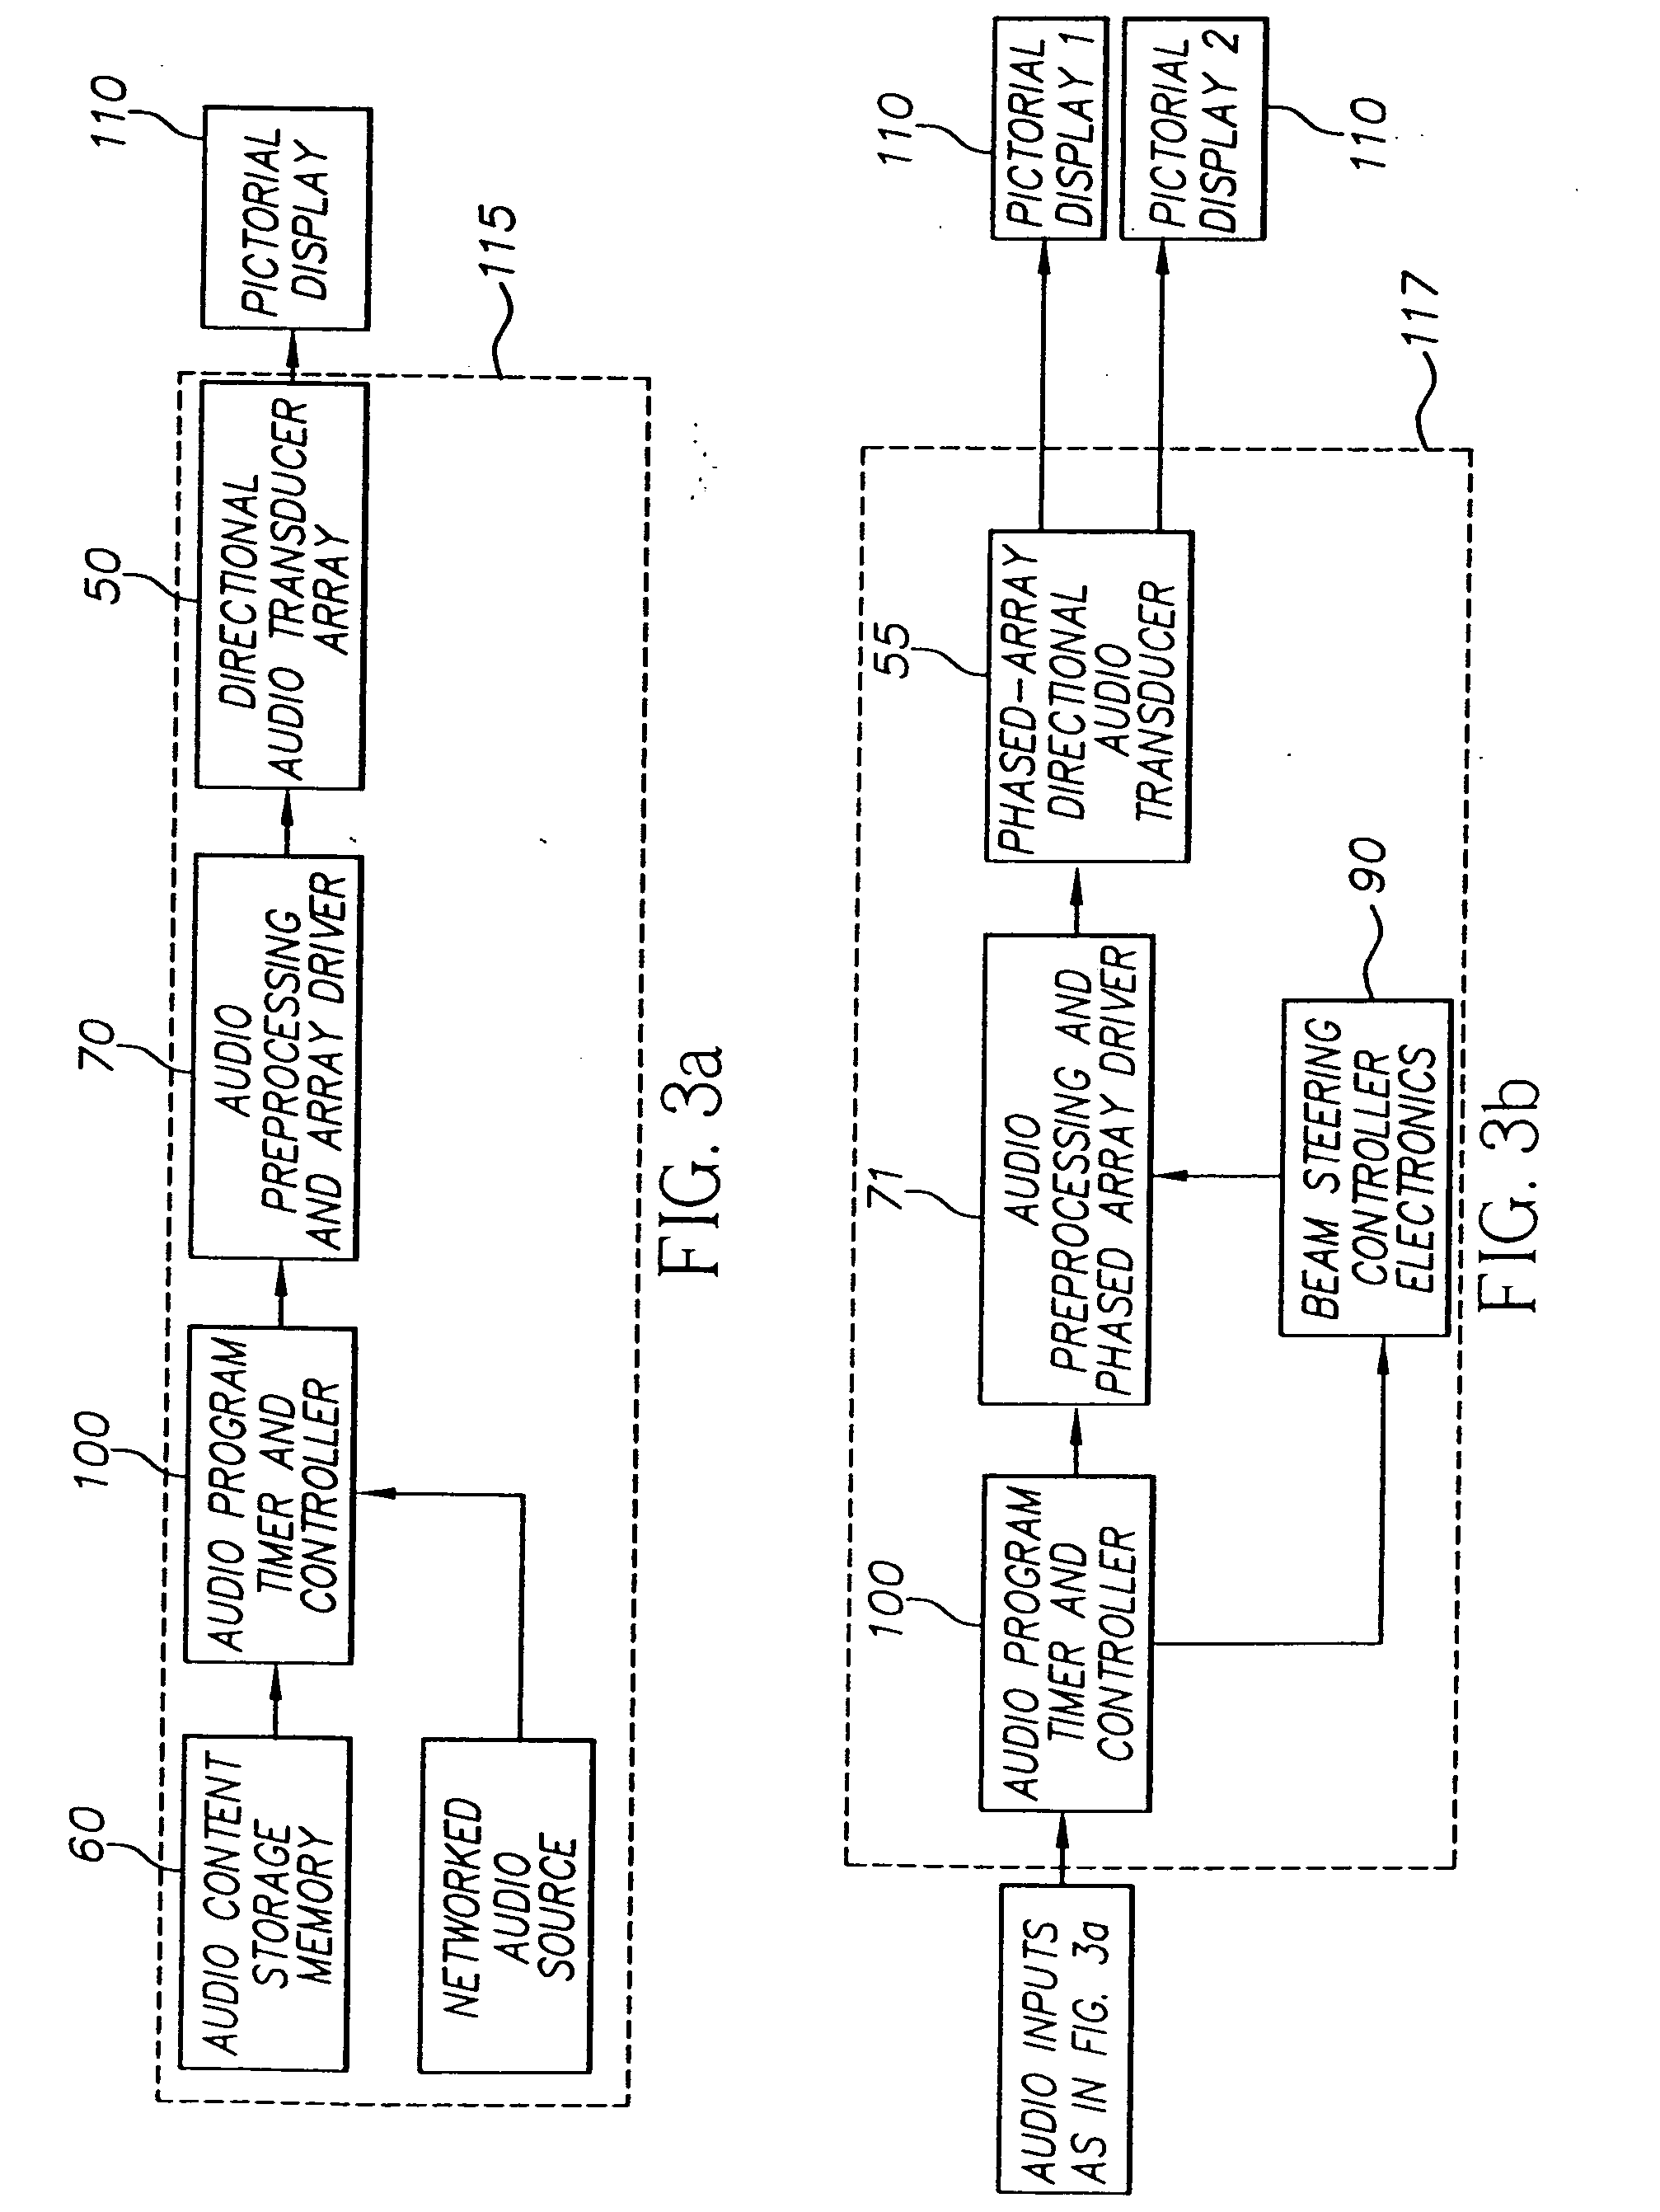 Display system and method with multi-person presentation function